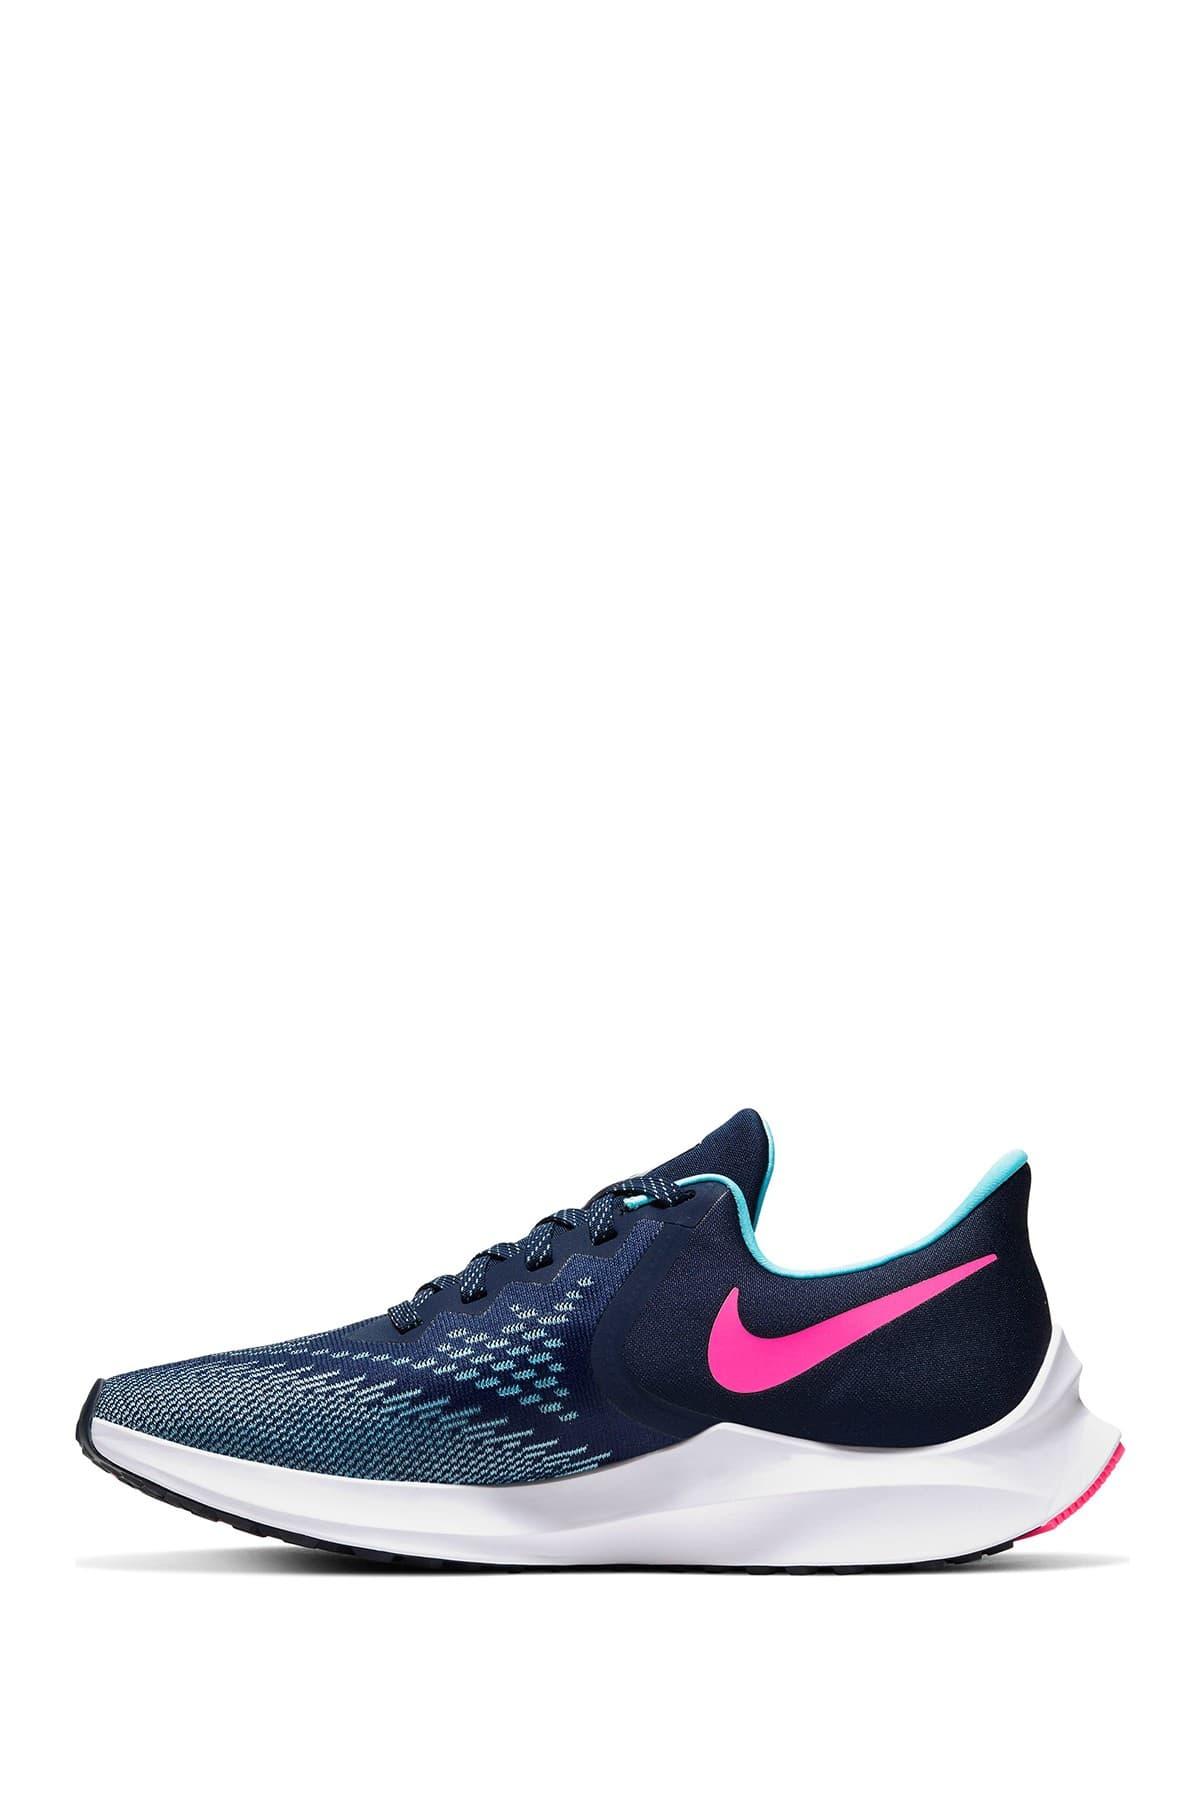 Nike Zoom Winflo 6 Running Shoes in Navy/Pink/Mint (Blue) | Lyst